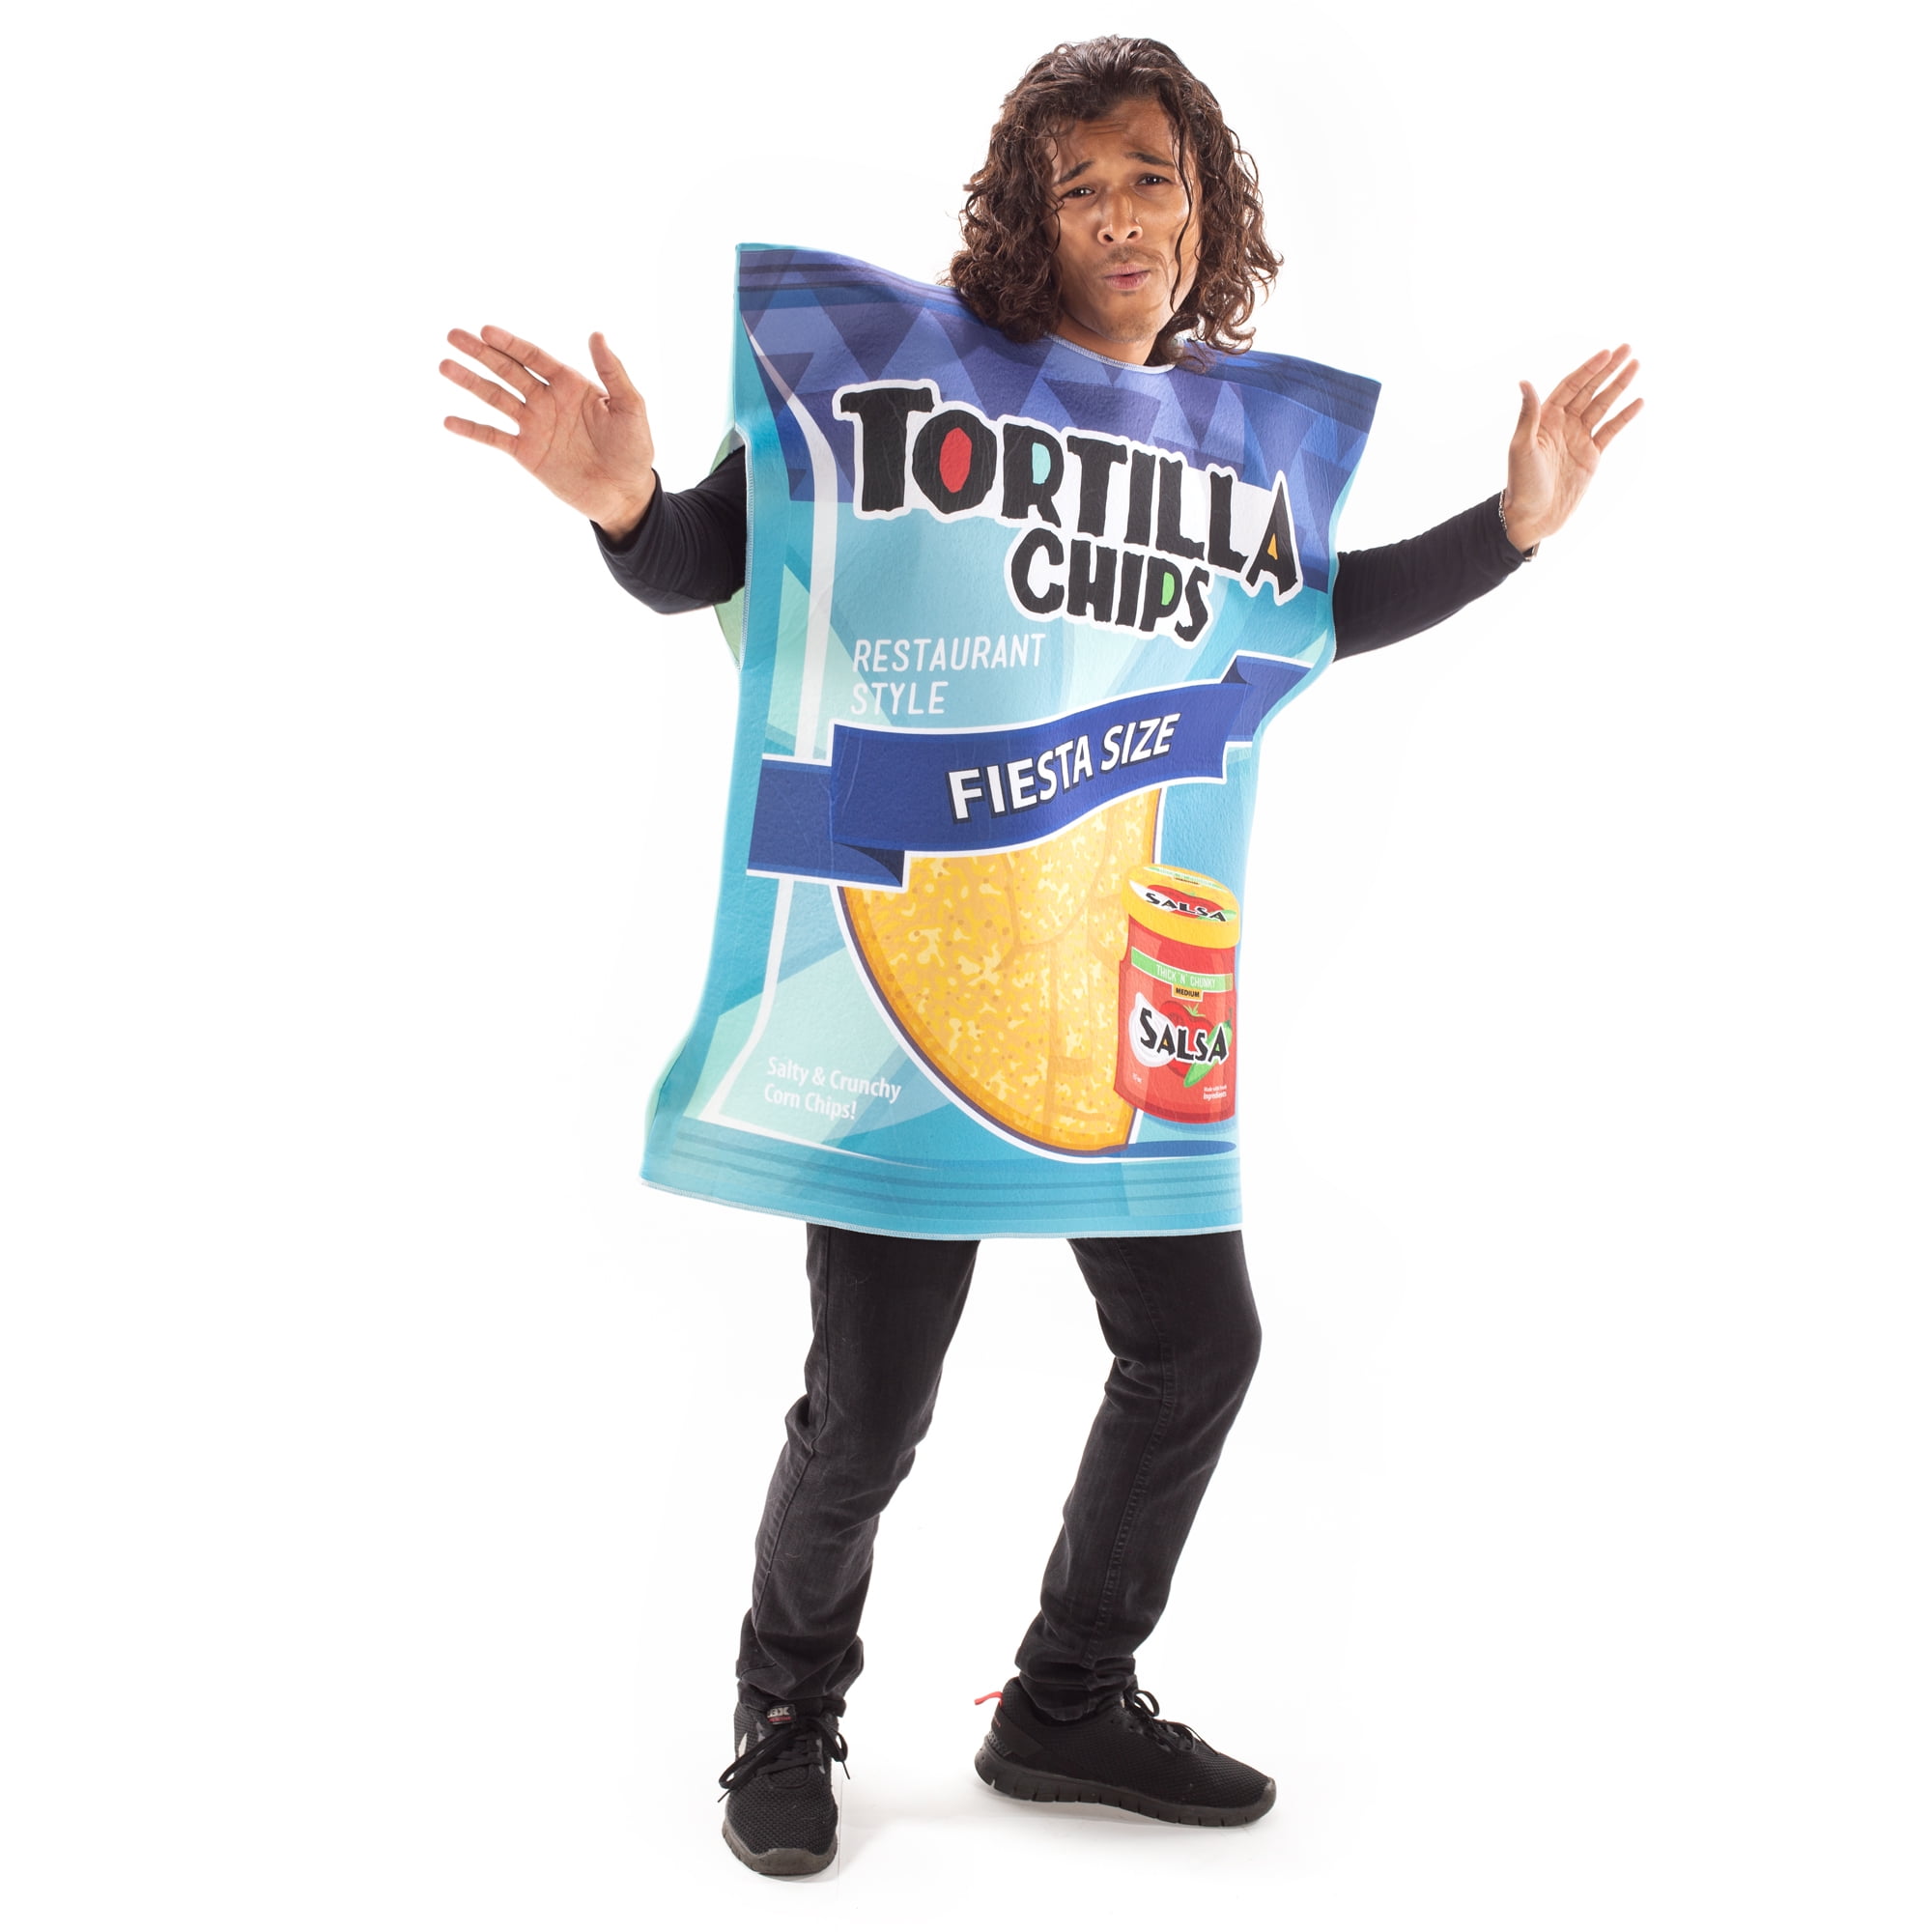 Halloween Costume Favorite Candy Suit Pop Chips Costume of the 